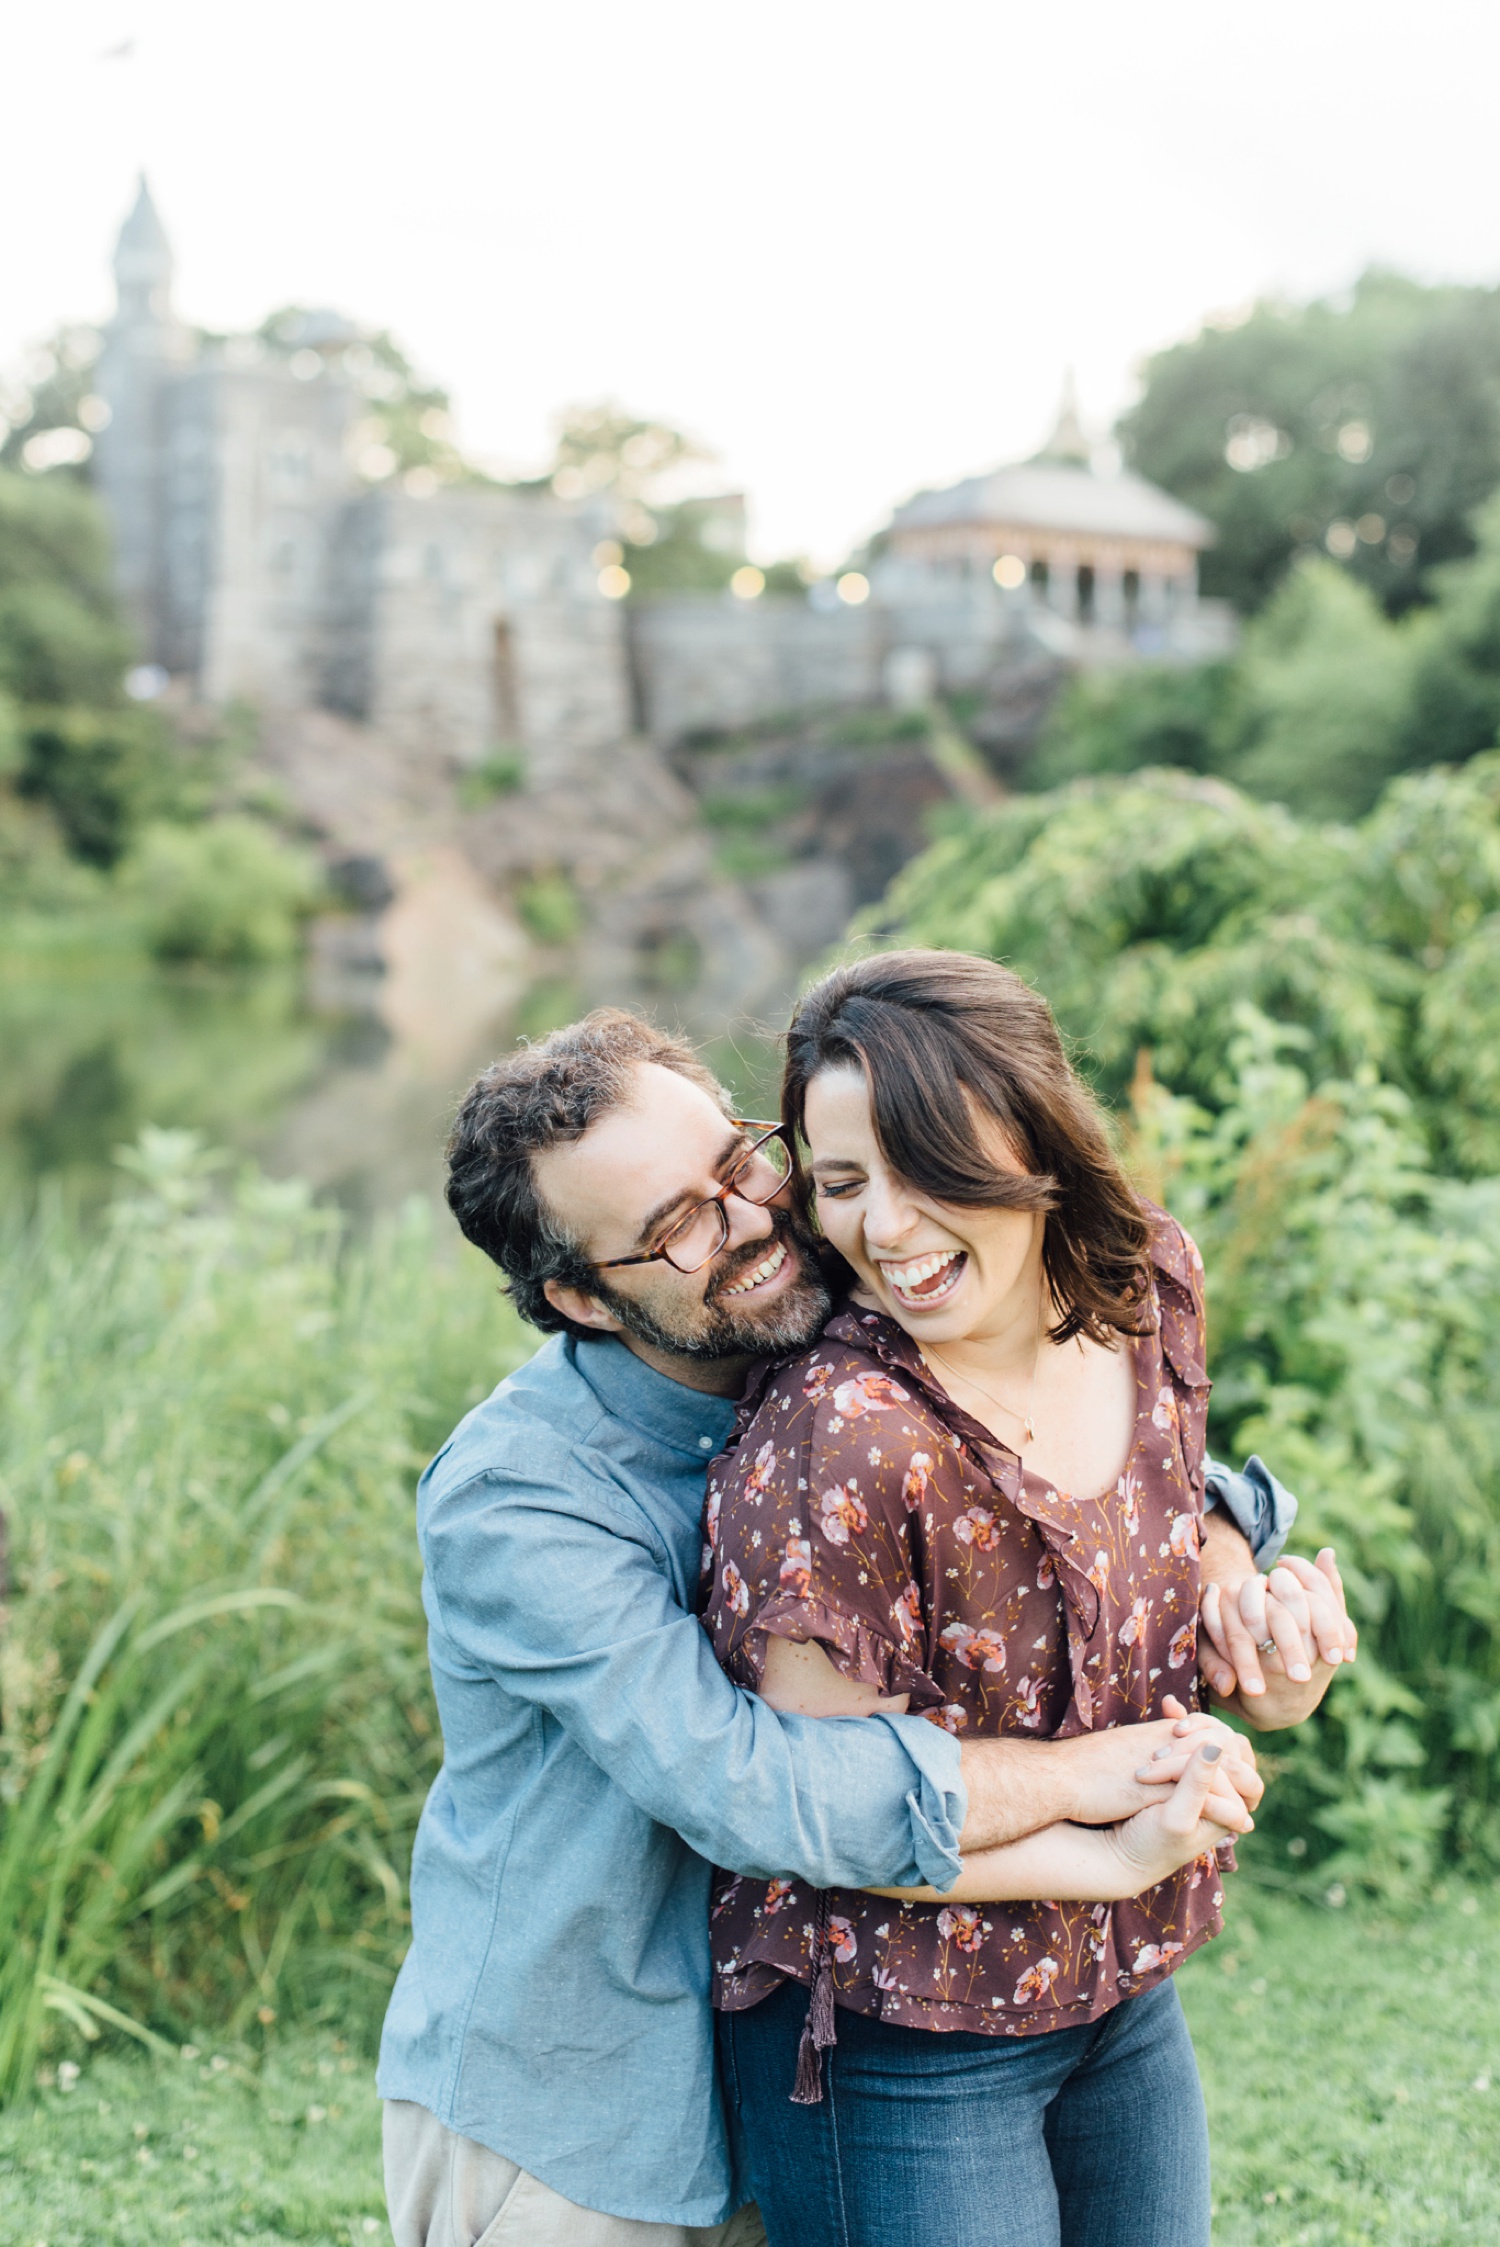 Mollie + Andrew - Delacorte Theater - Central Park Engagement Session - Alison Dunn Photography photo